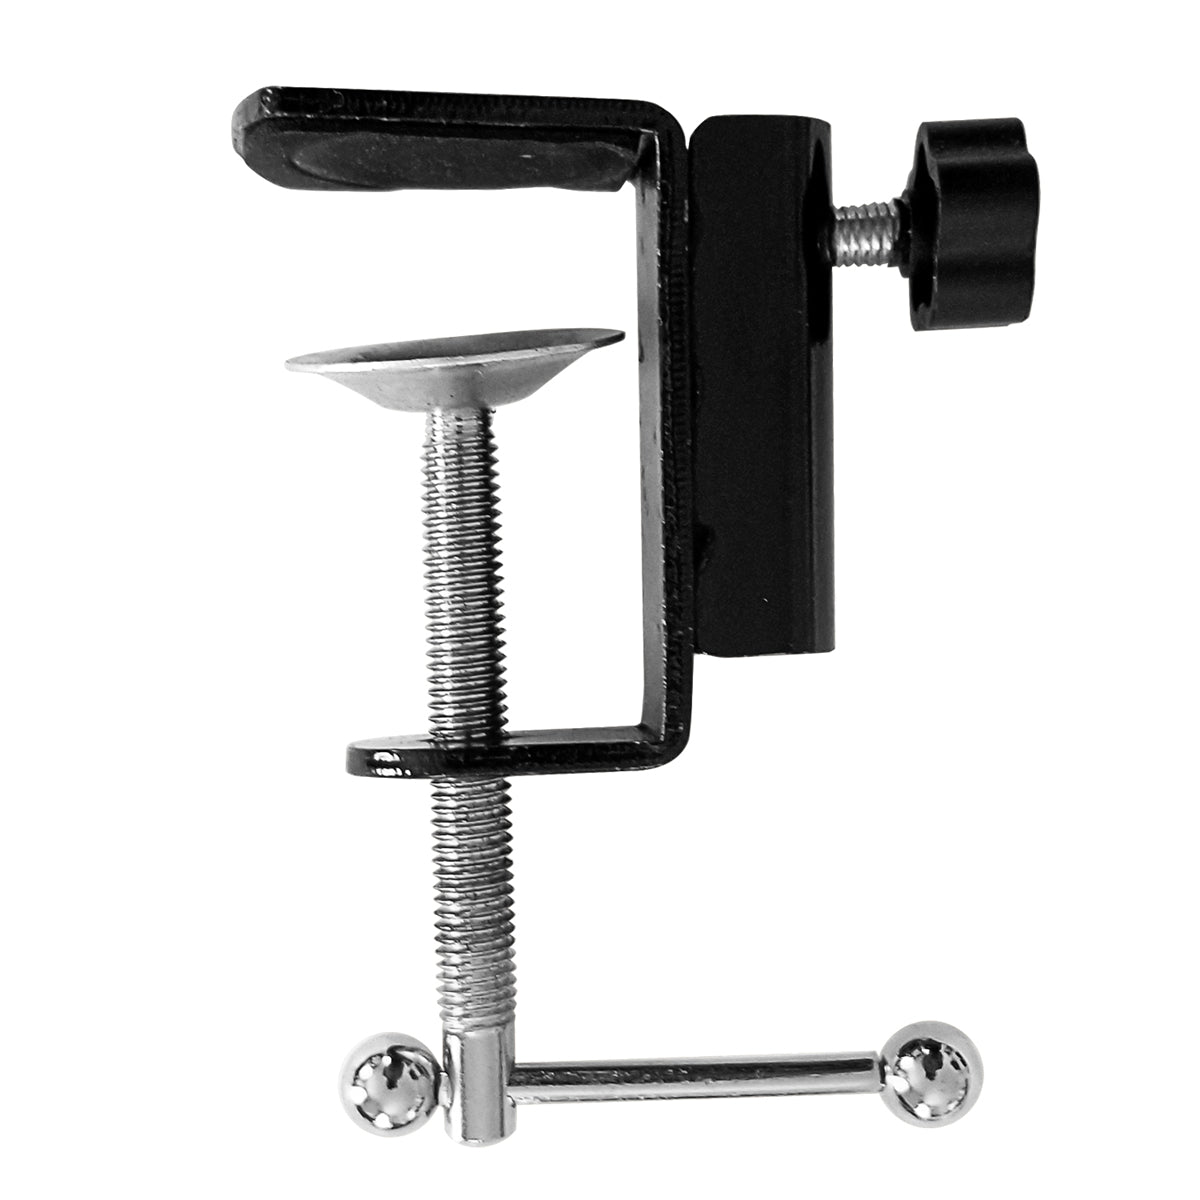 AxcessAbles Desktop Mount Microphone Swivel Boom Arm with Microphone Clip and 5ft Mic Cable for Podcast/Radio Broadcasting/Studio/Voice Over